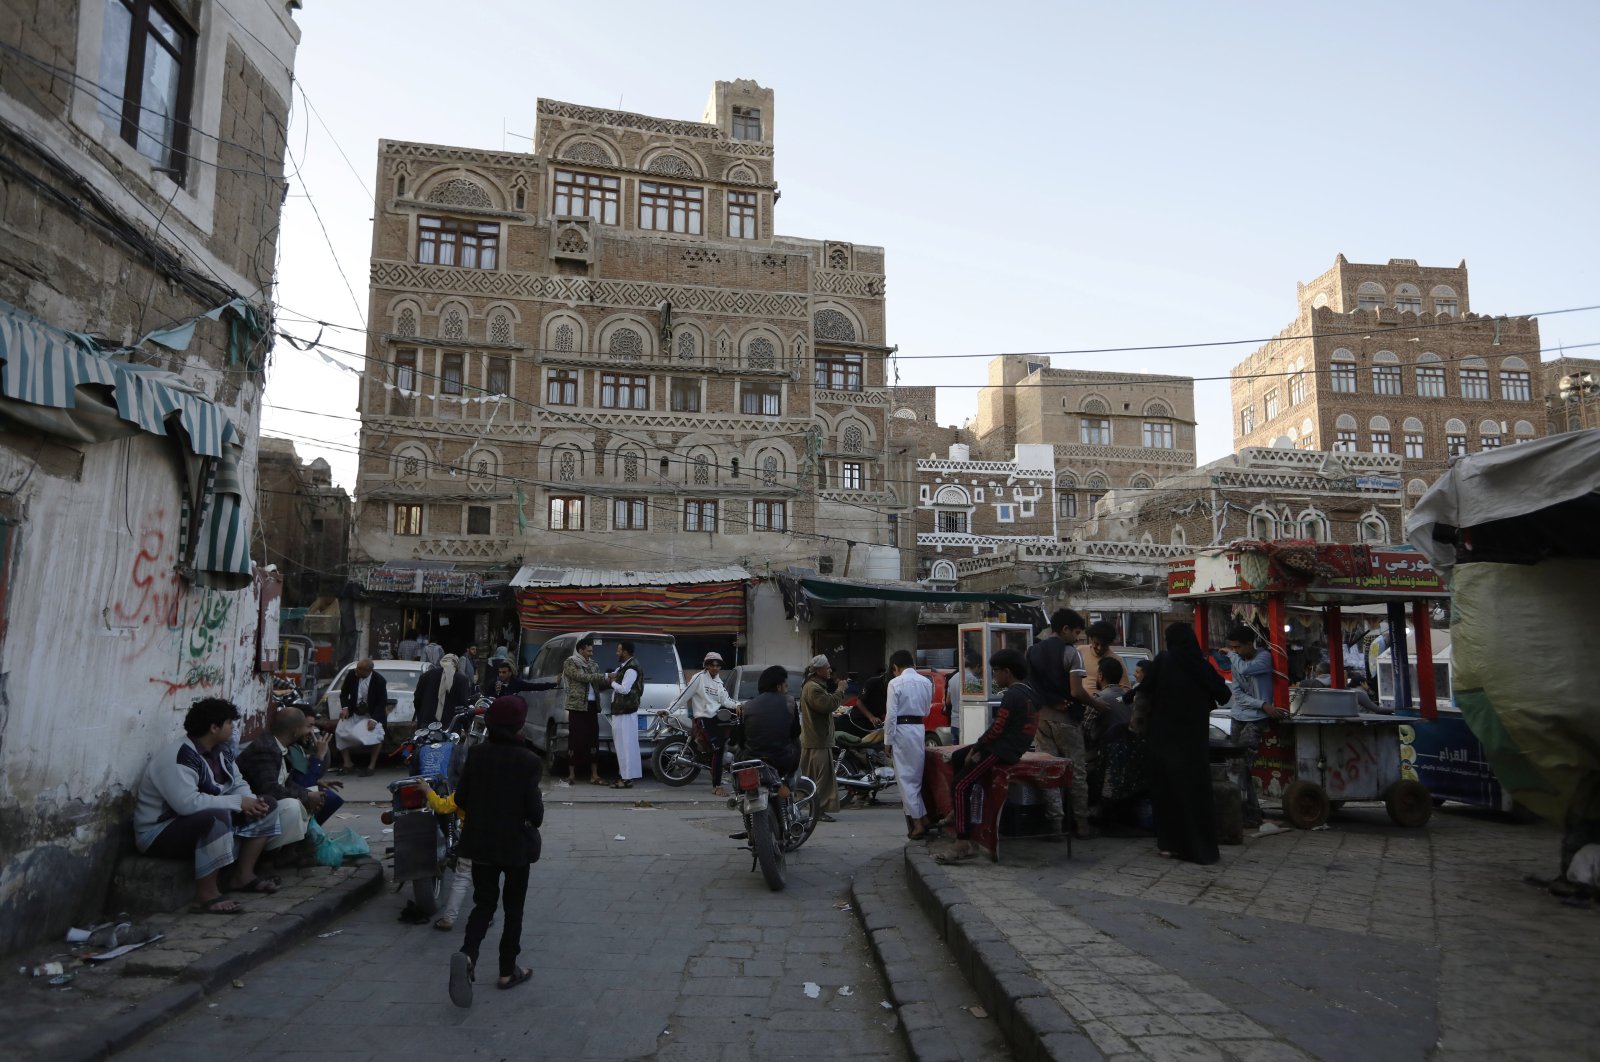 Yemenis walk past buildings, a day after the warring parties agreed to a two-month truce, in the old city of Sanaa, Yemen, April 2, 2022. (EPA)